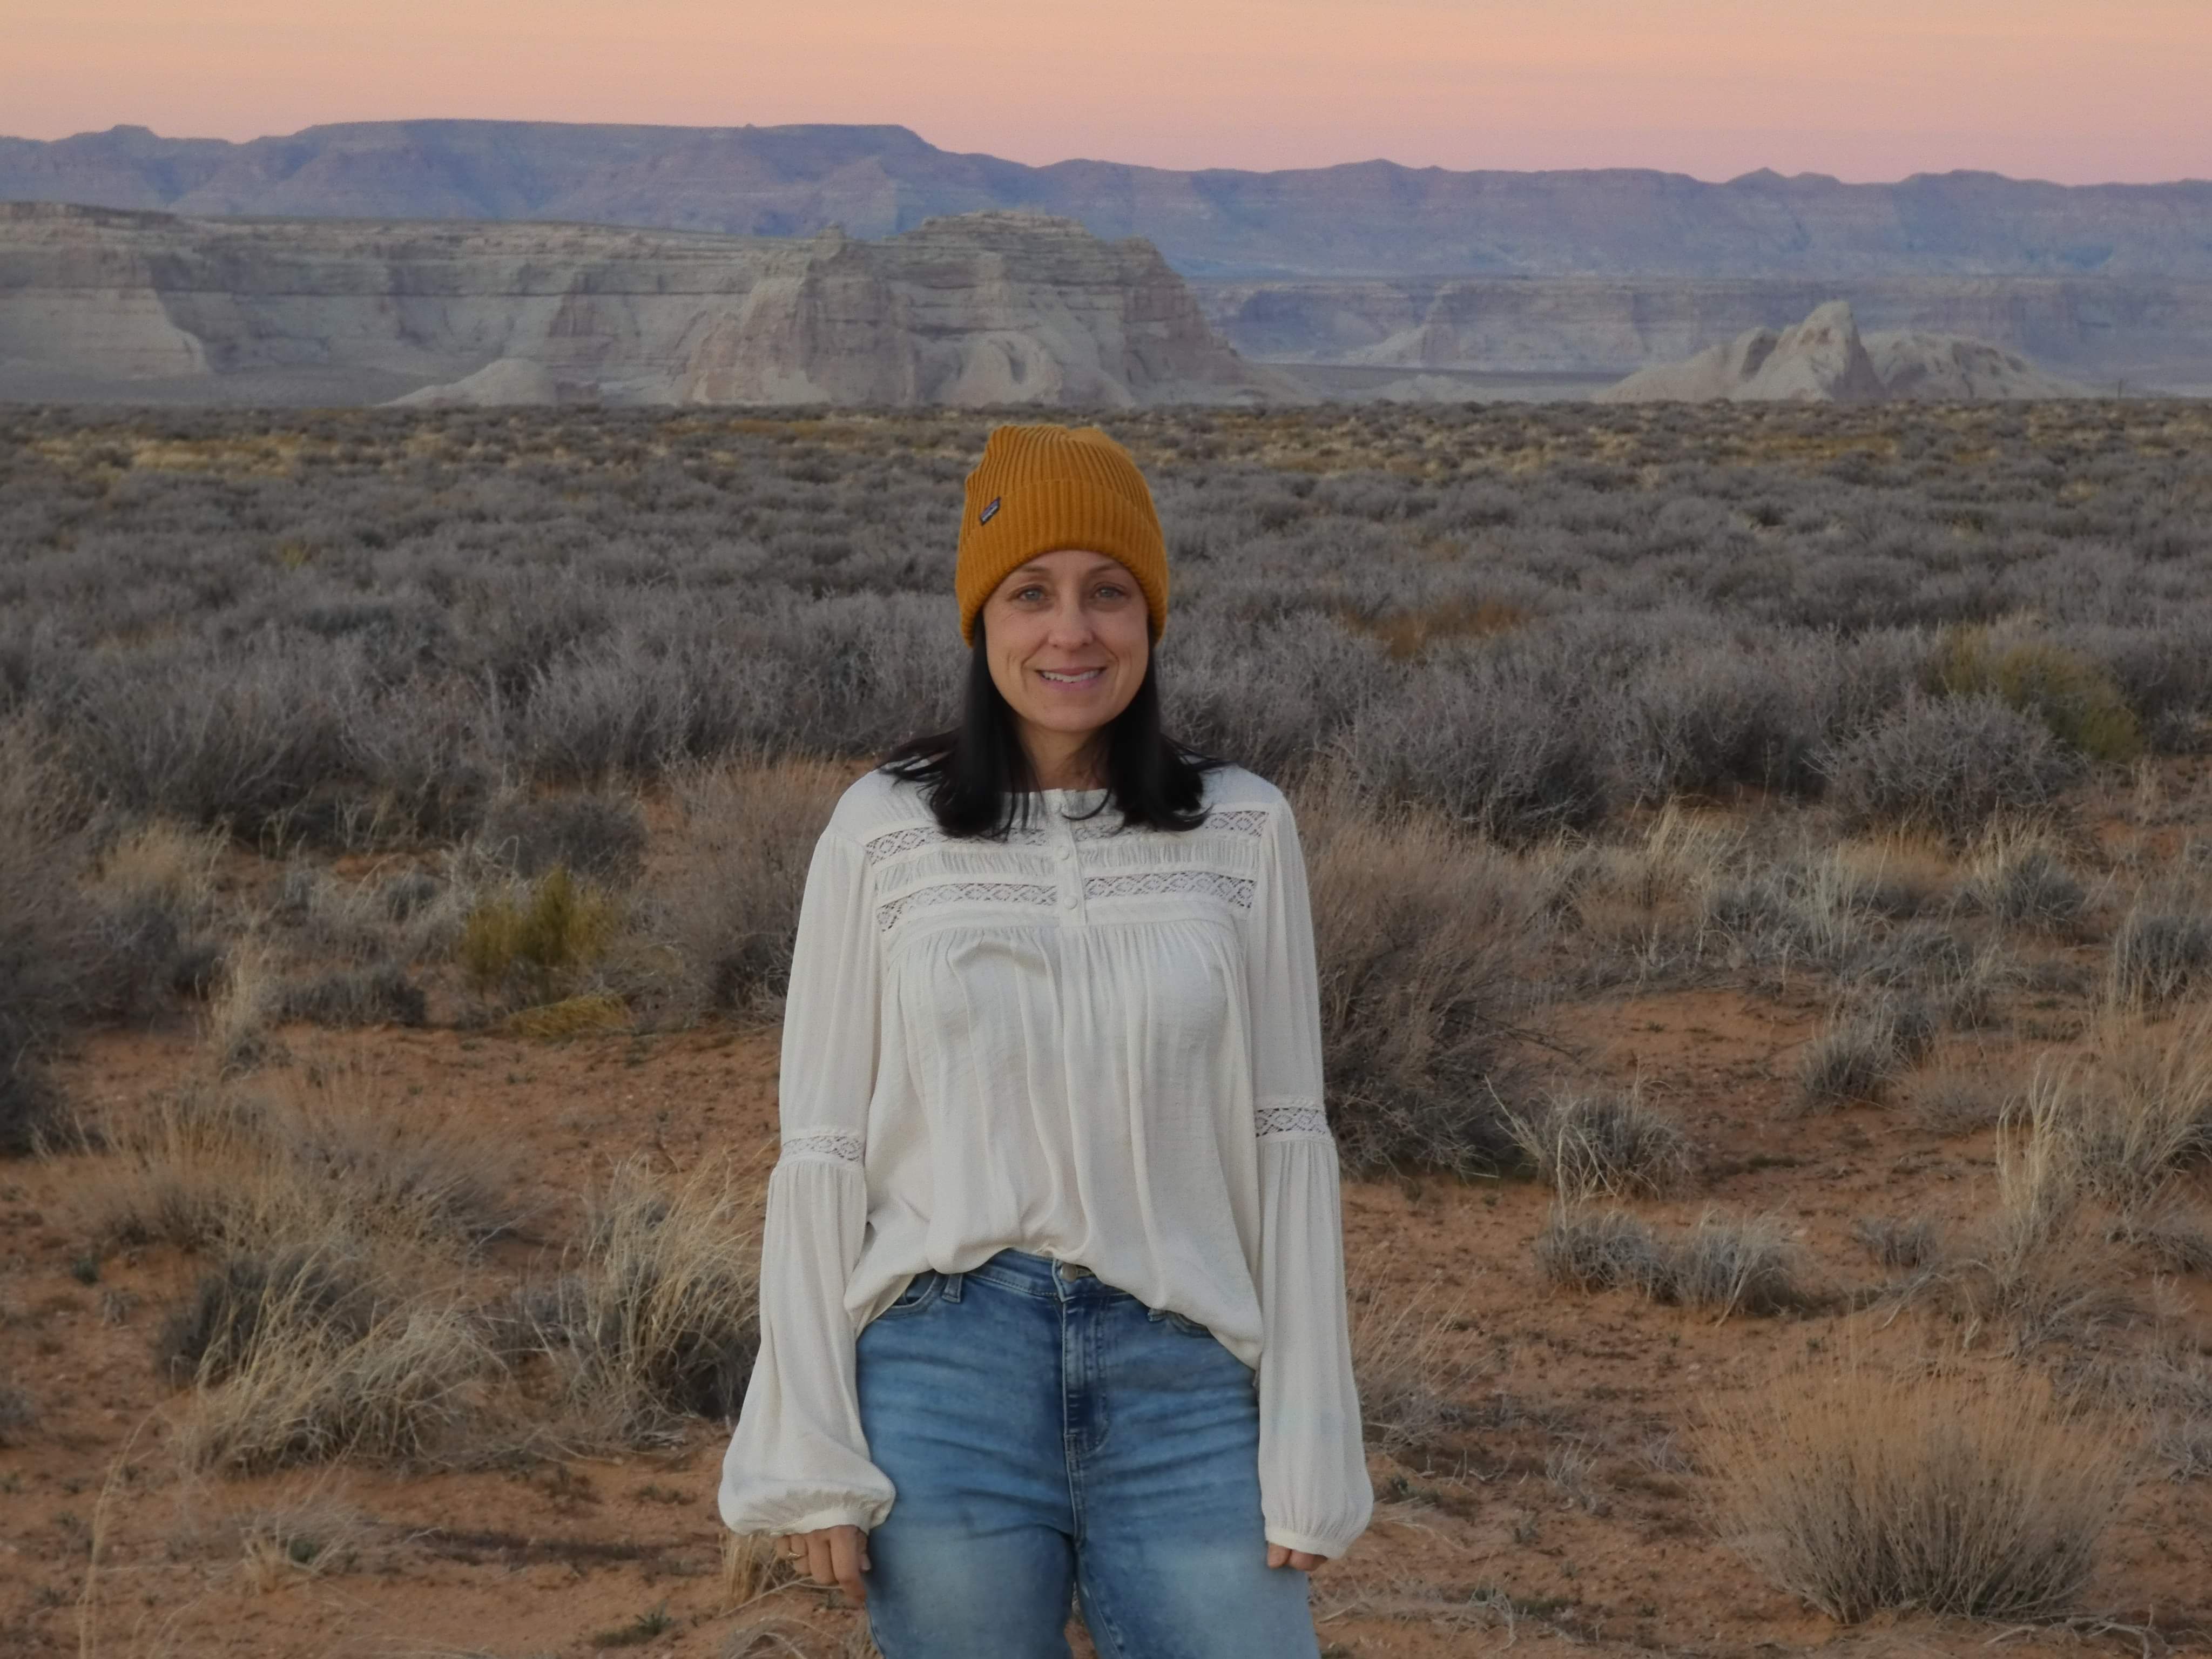 AEM Lisa Medlyn poses in front of scenic Arizona terrain on a hike.